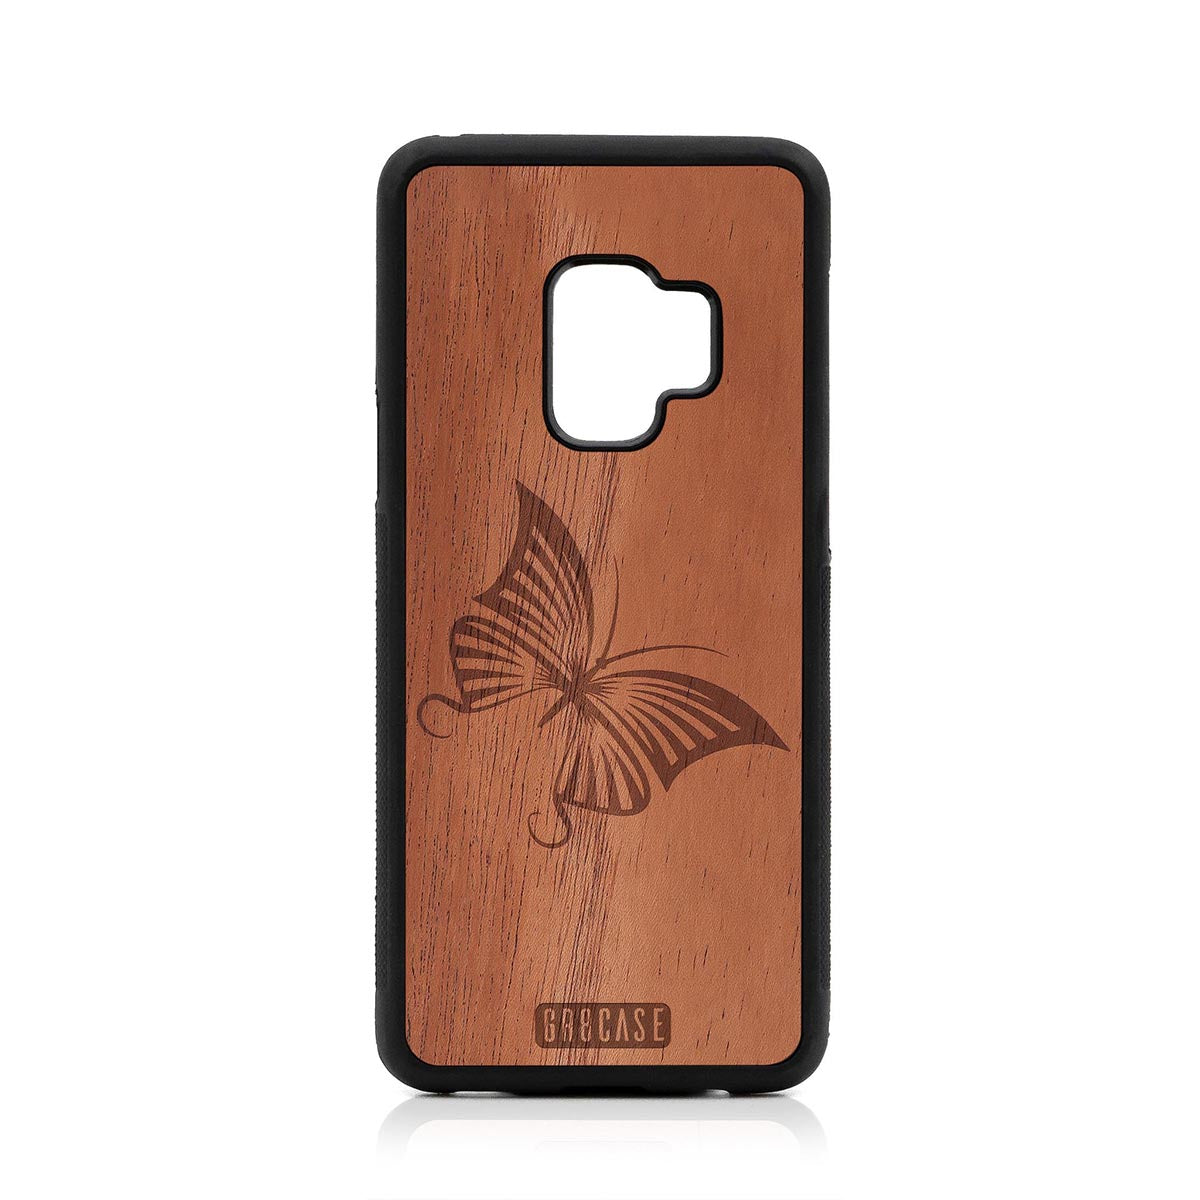 Butterfly Design Wood Case Samsung Galaxy S9 by GR8CASE